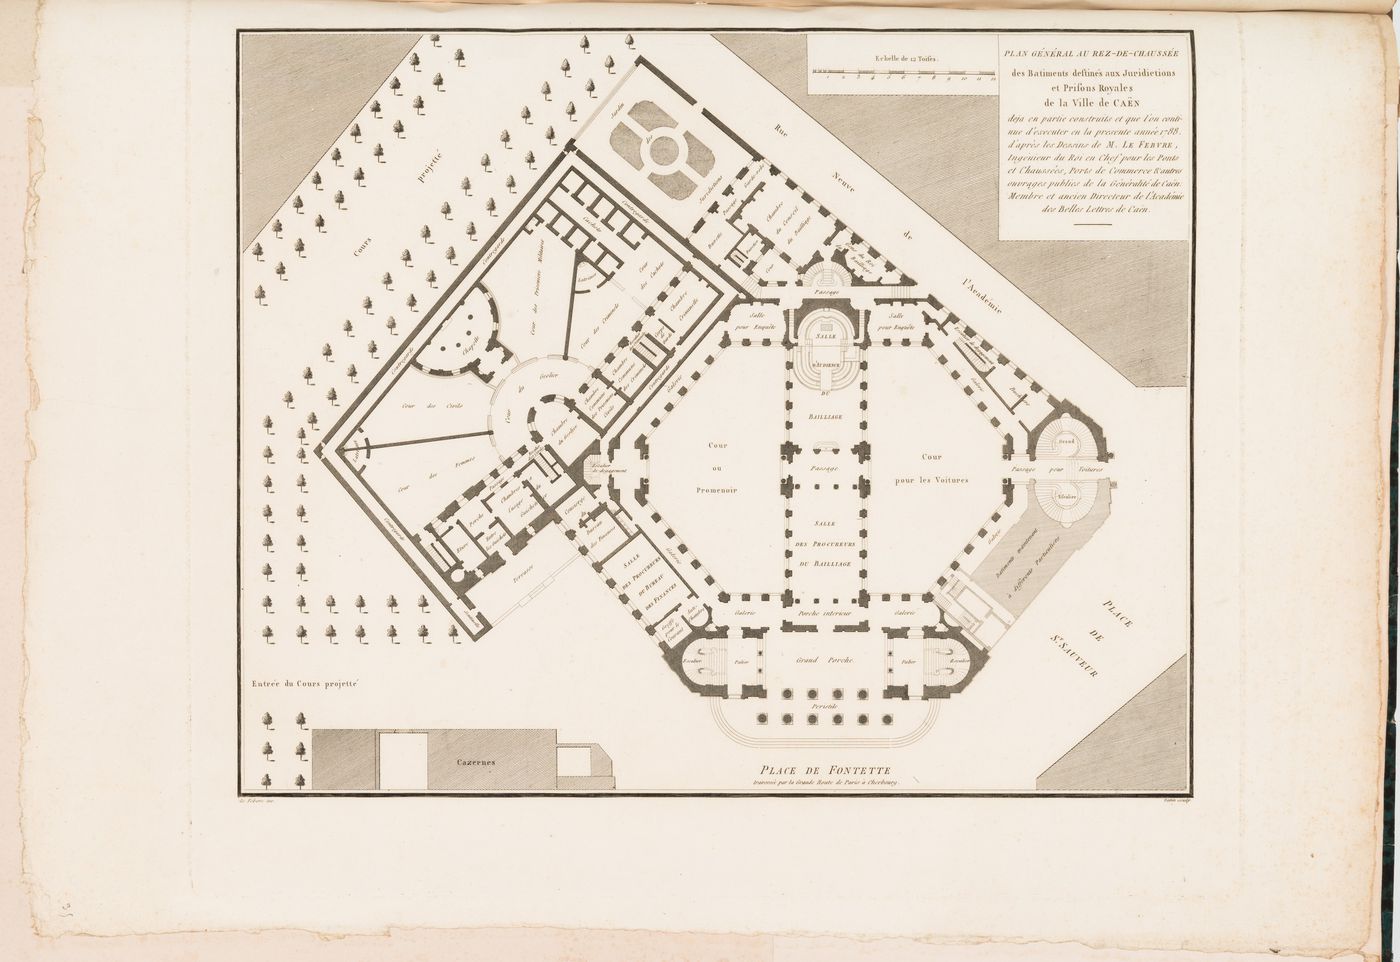 Prisons royales, Caen, France: Site plan showing the ground floor